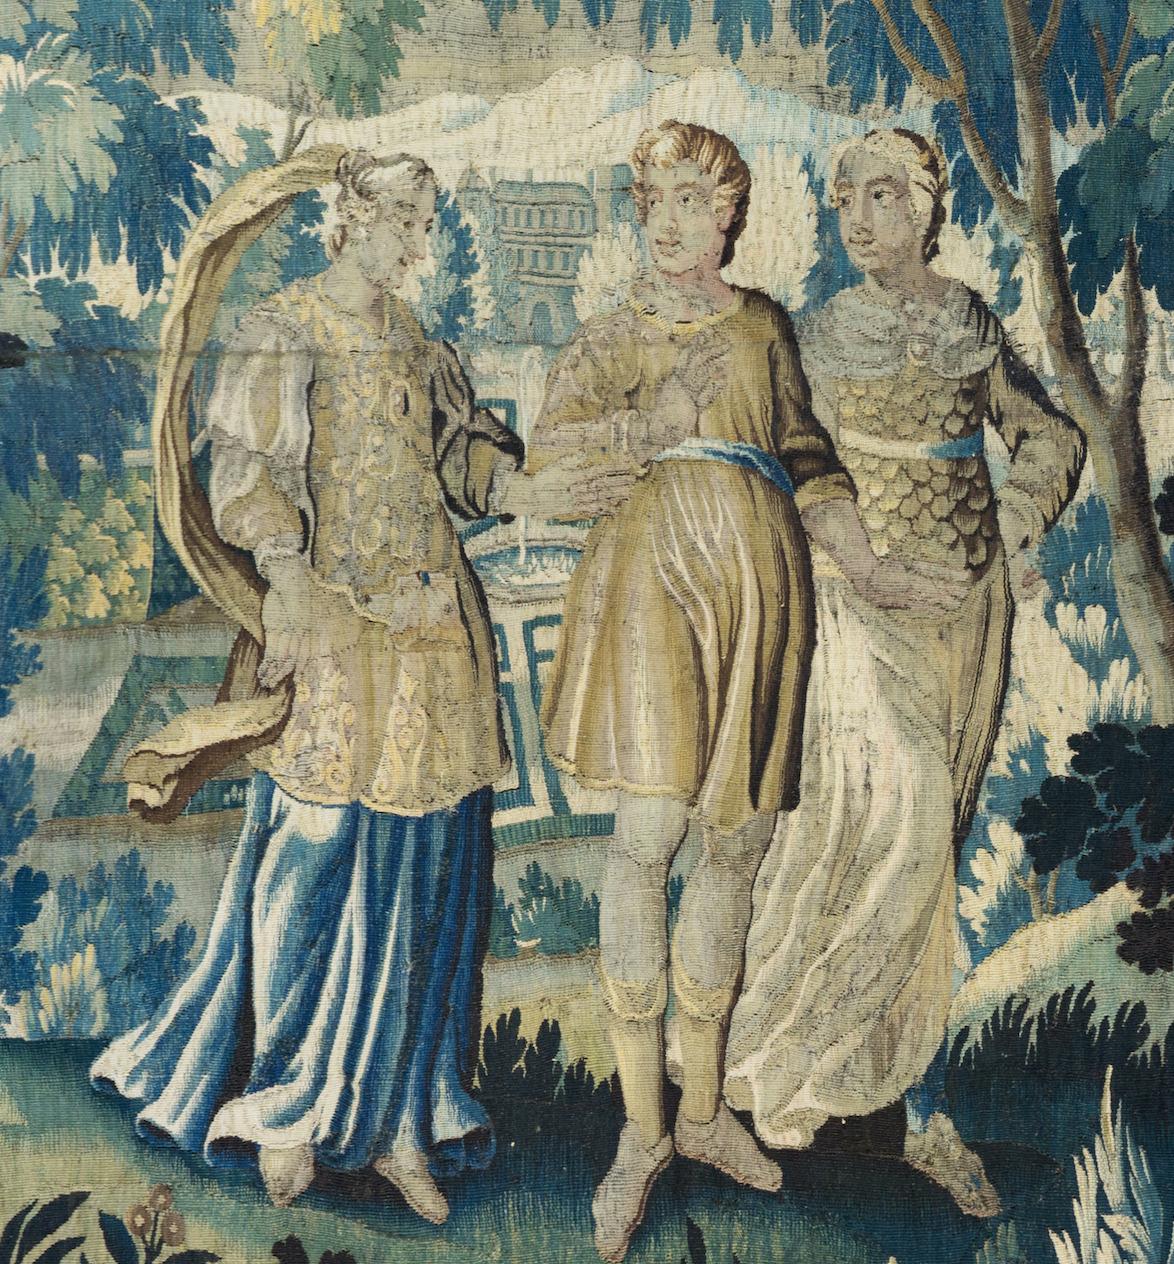 This is a lovely Antique 17th Century Square Green Floral Flemish Verdure tapestry depicting a nobleman out for a stroll with two noblewomen on a beautiful summer day in the countryside with lush trees and vegetation. We see the manor and its